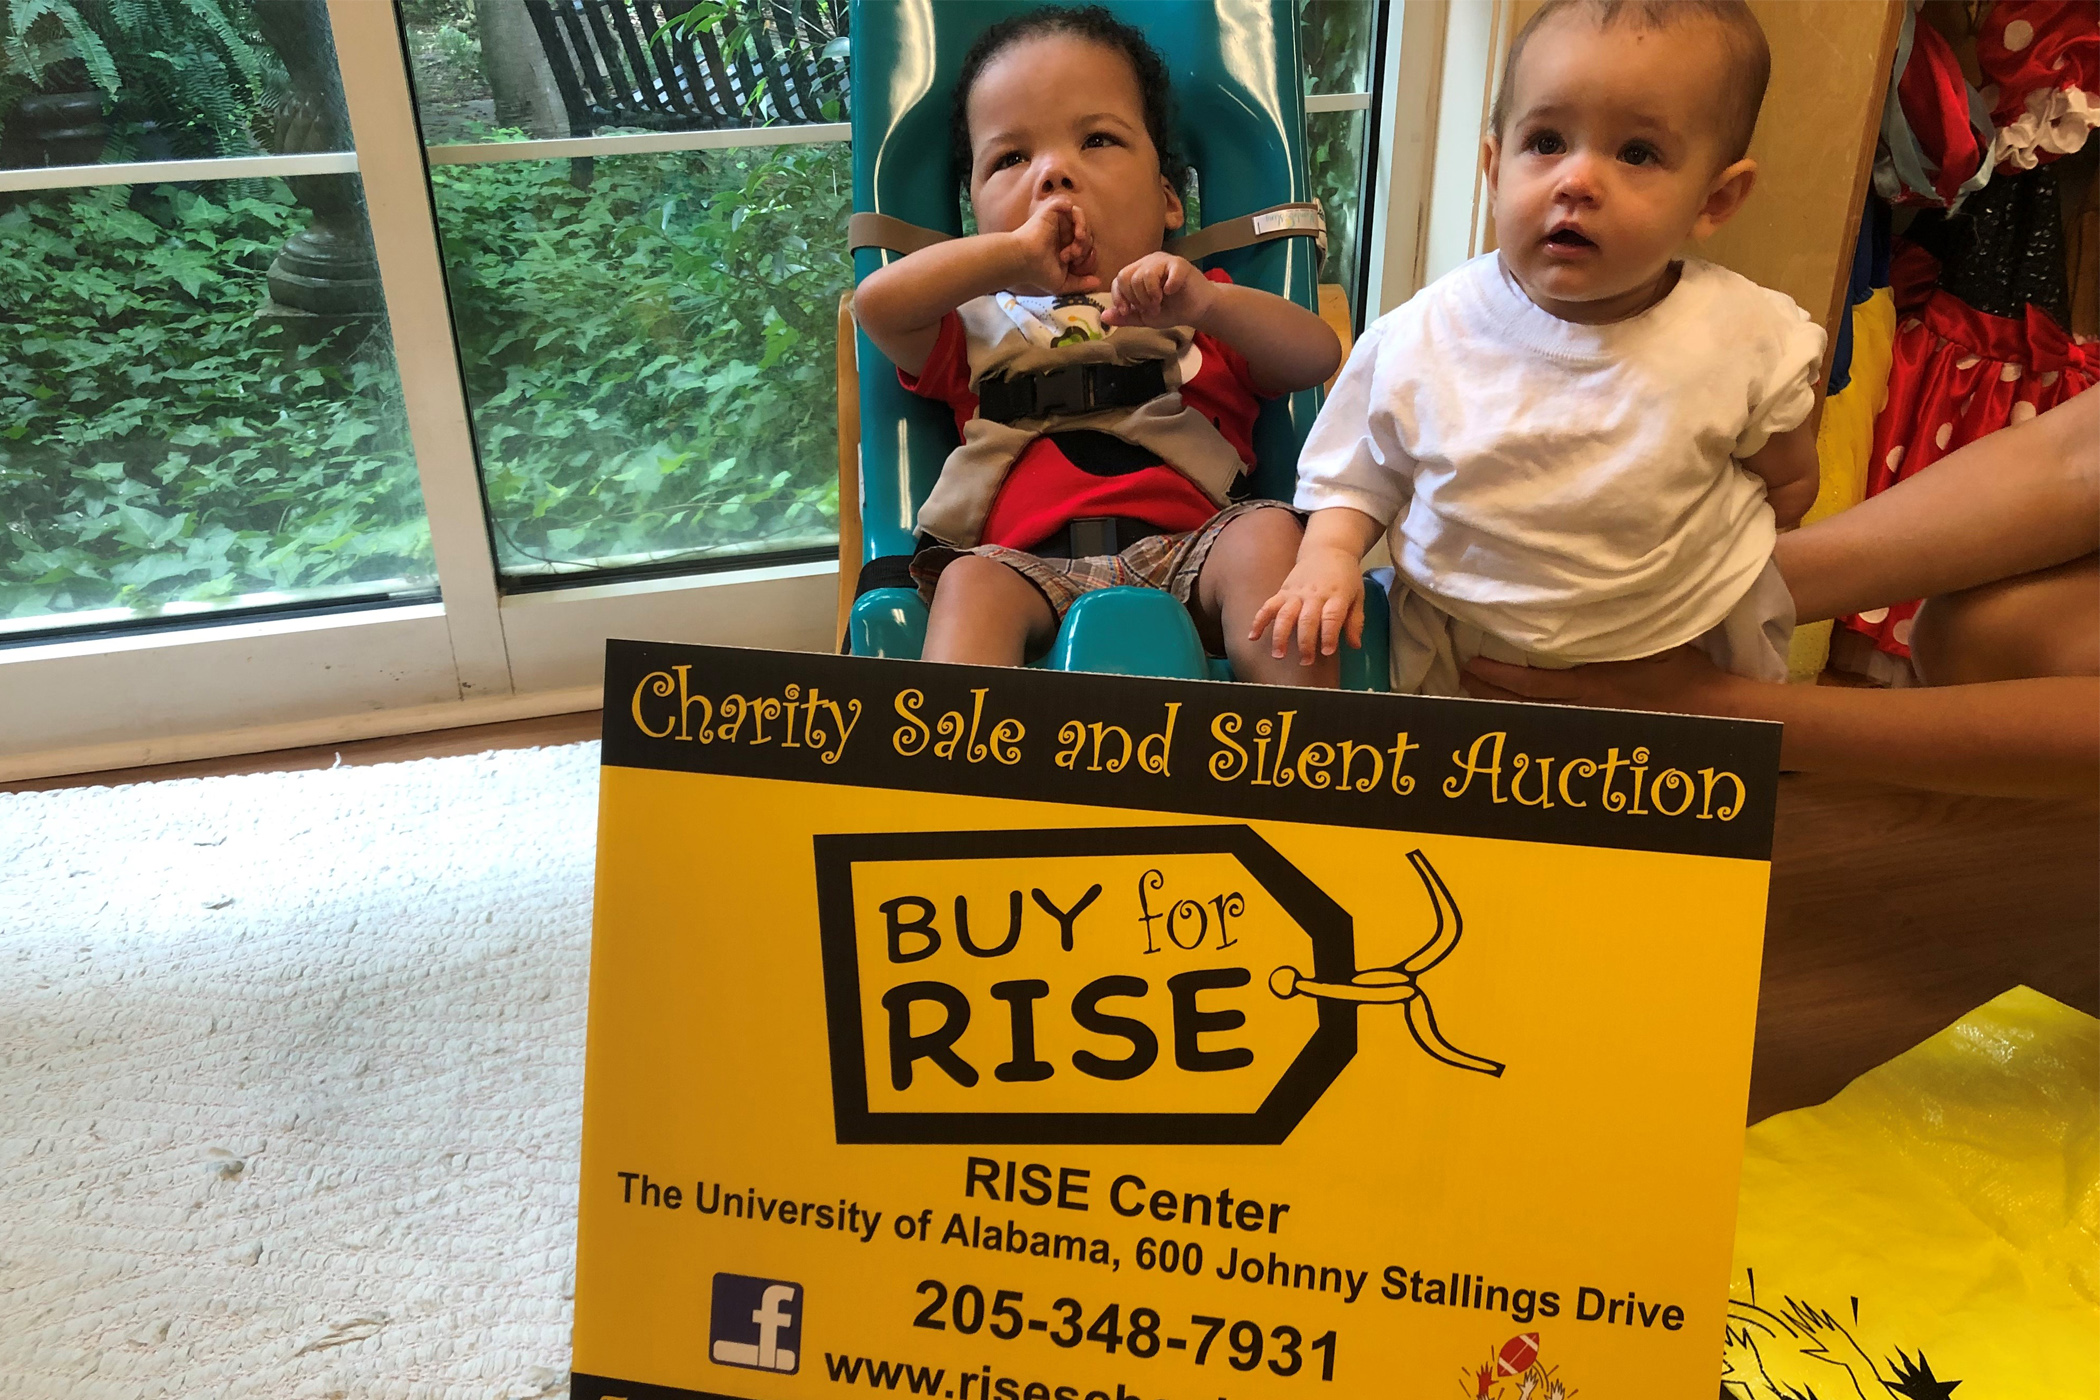 Two young children with signage promoting the RISE fundraiser.